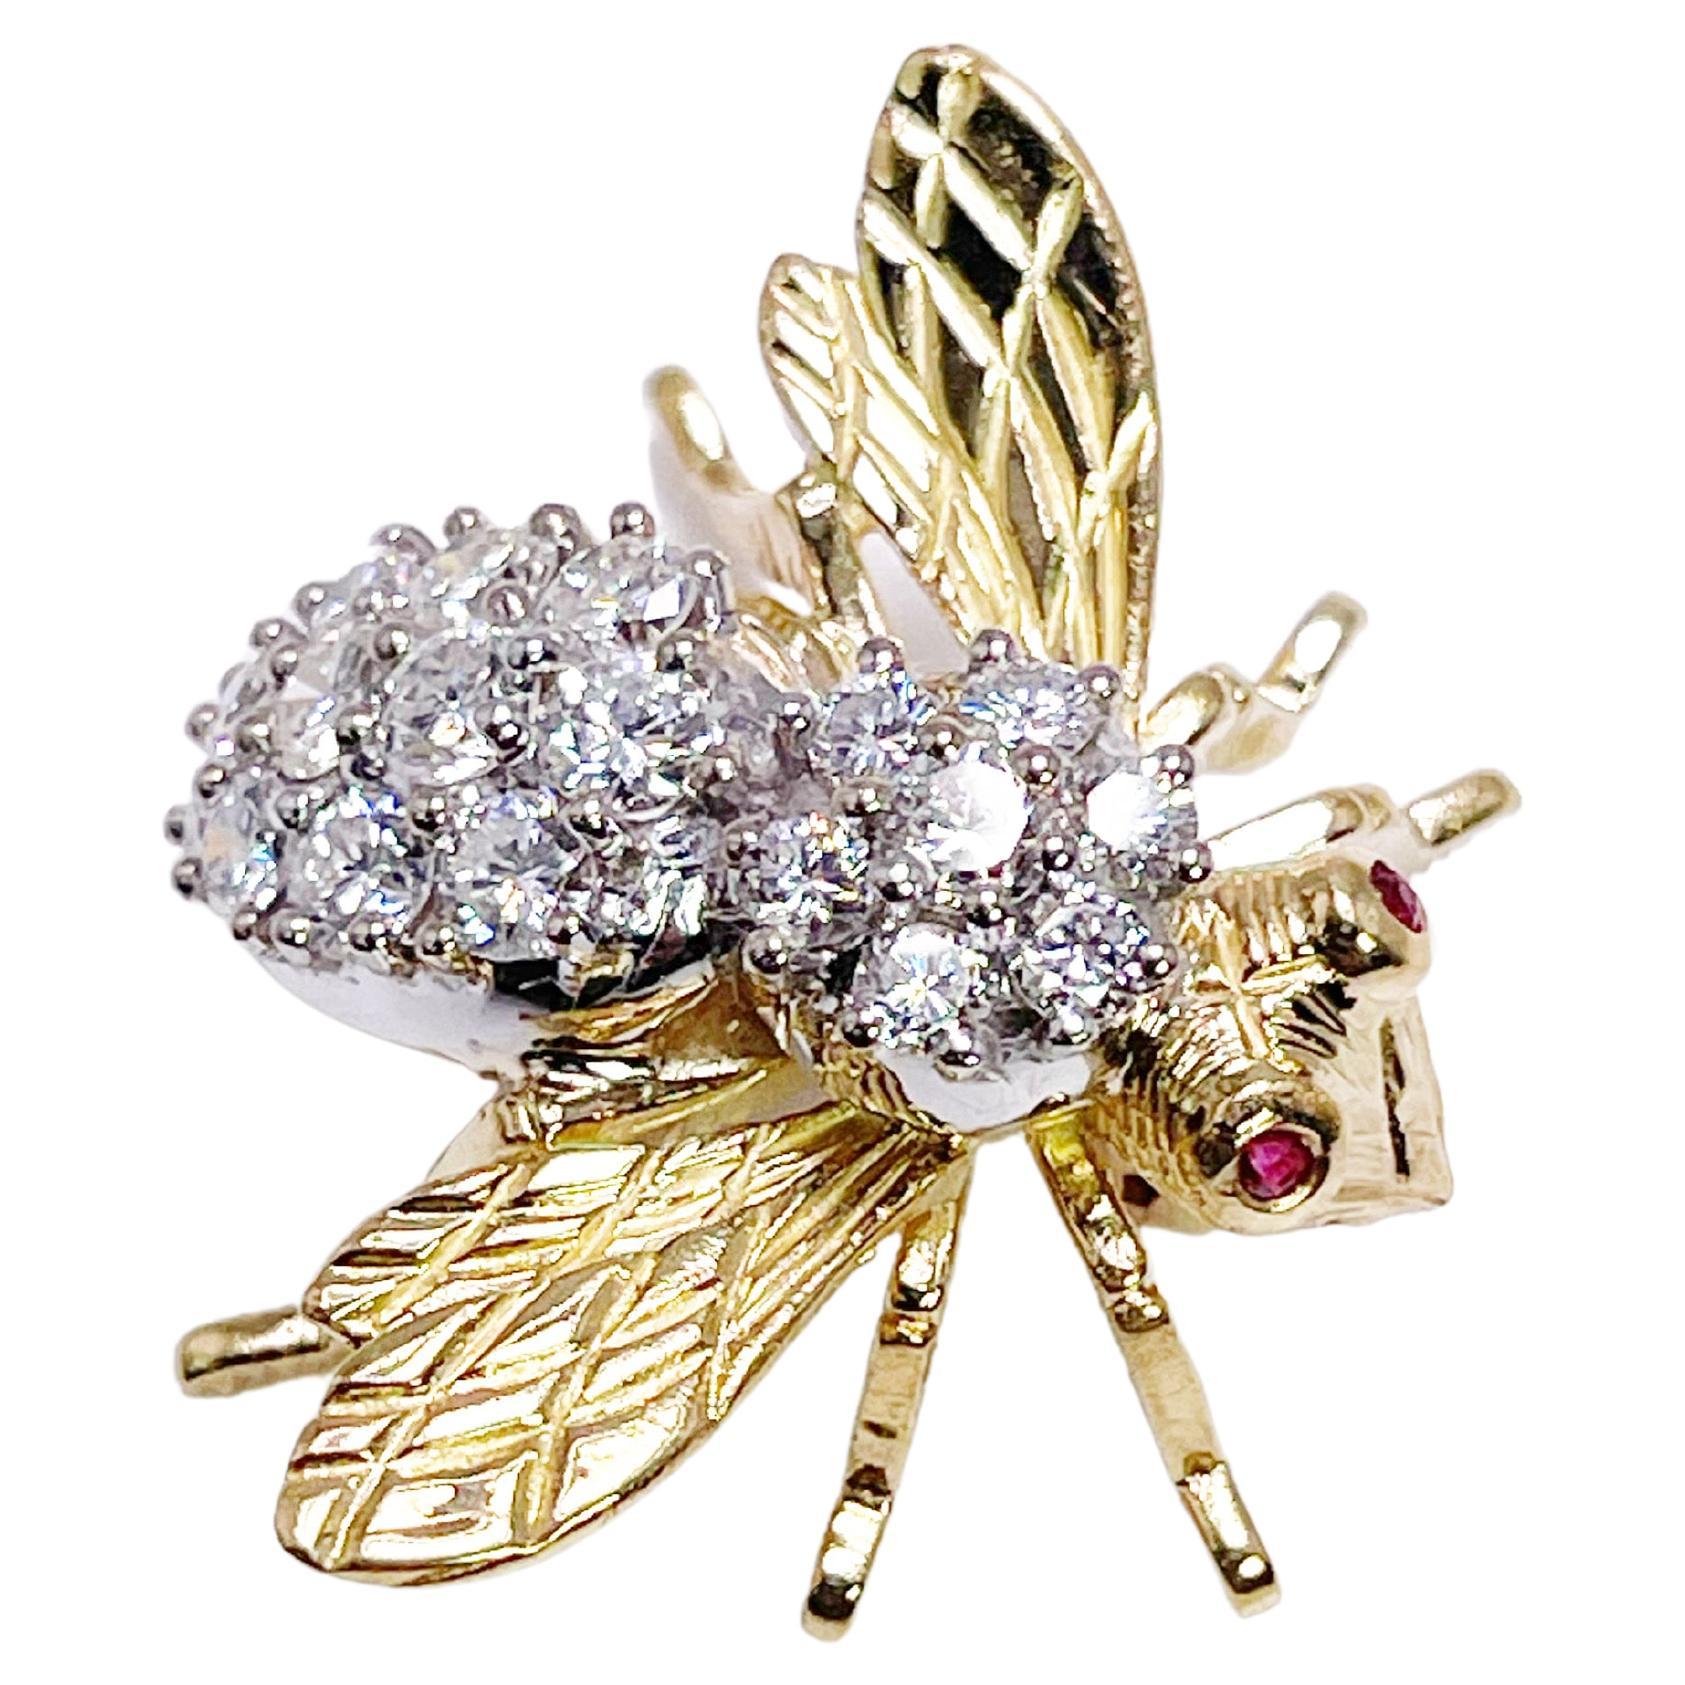 Herbert Rosenthal Large Bee Diamond Pin Brooch Rare Find 1.55 Carats For Sale